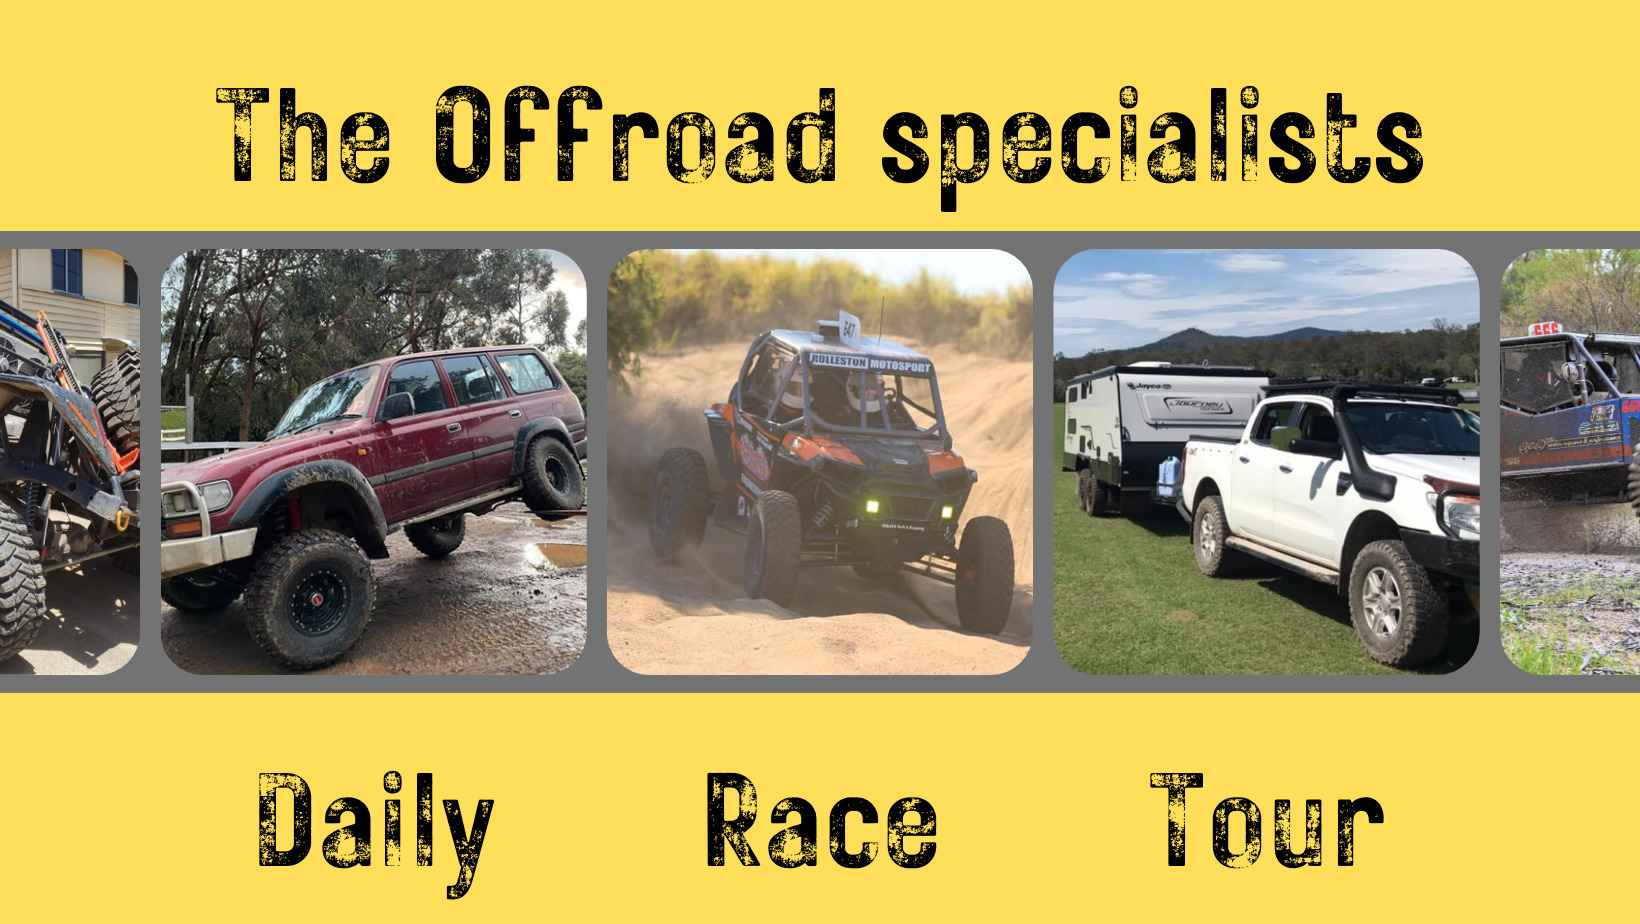 The offroad specialists